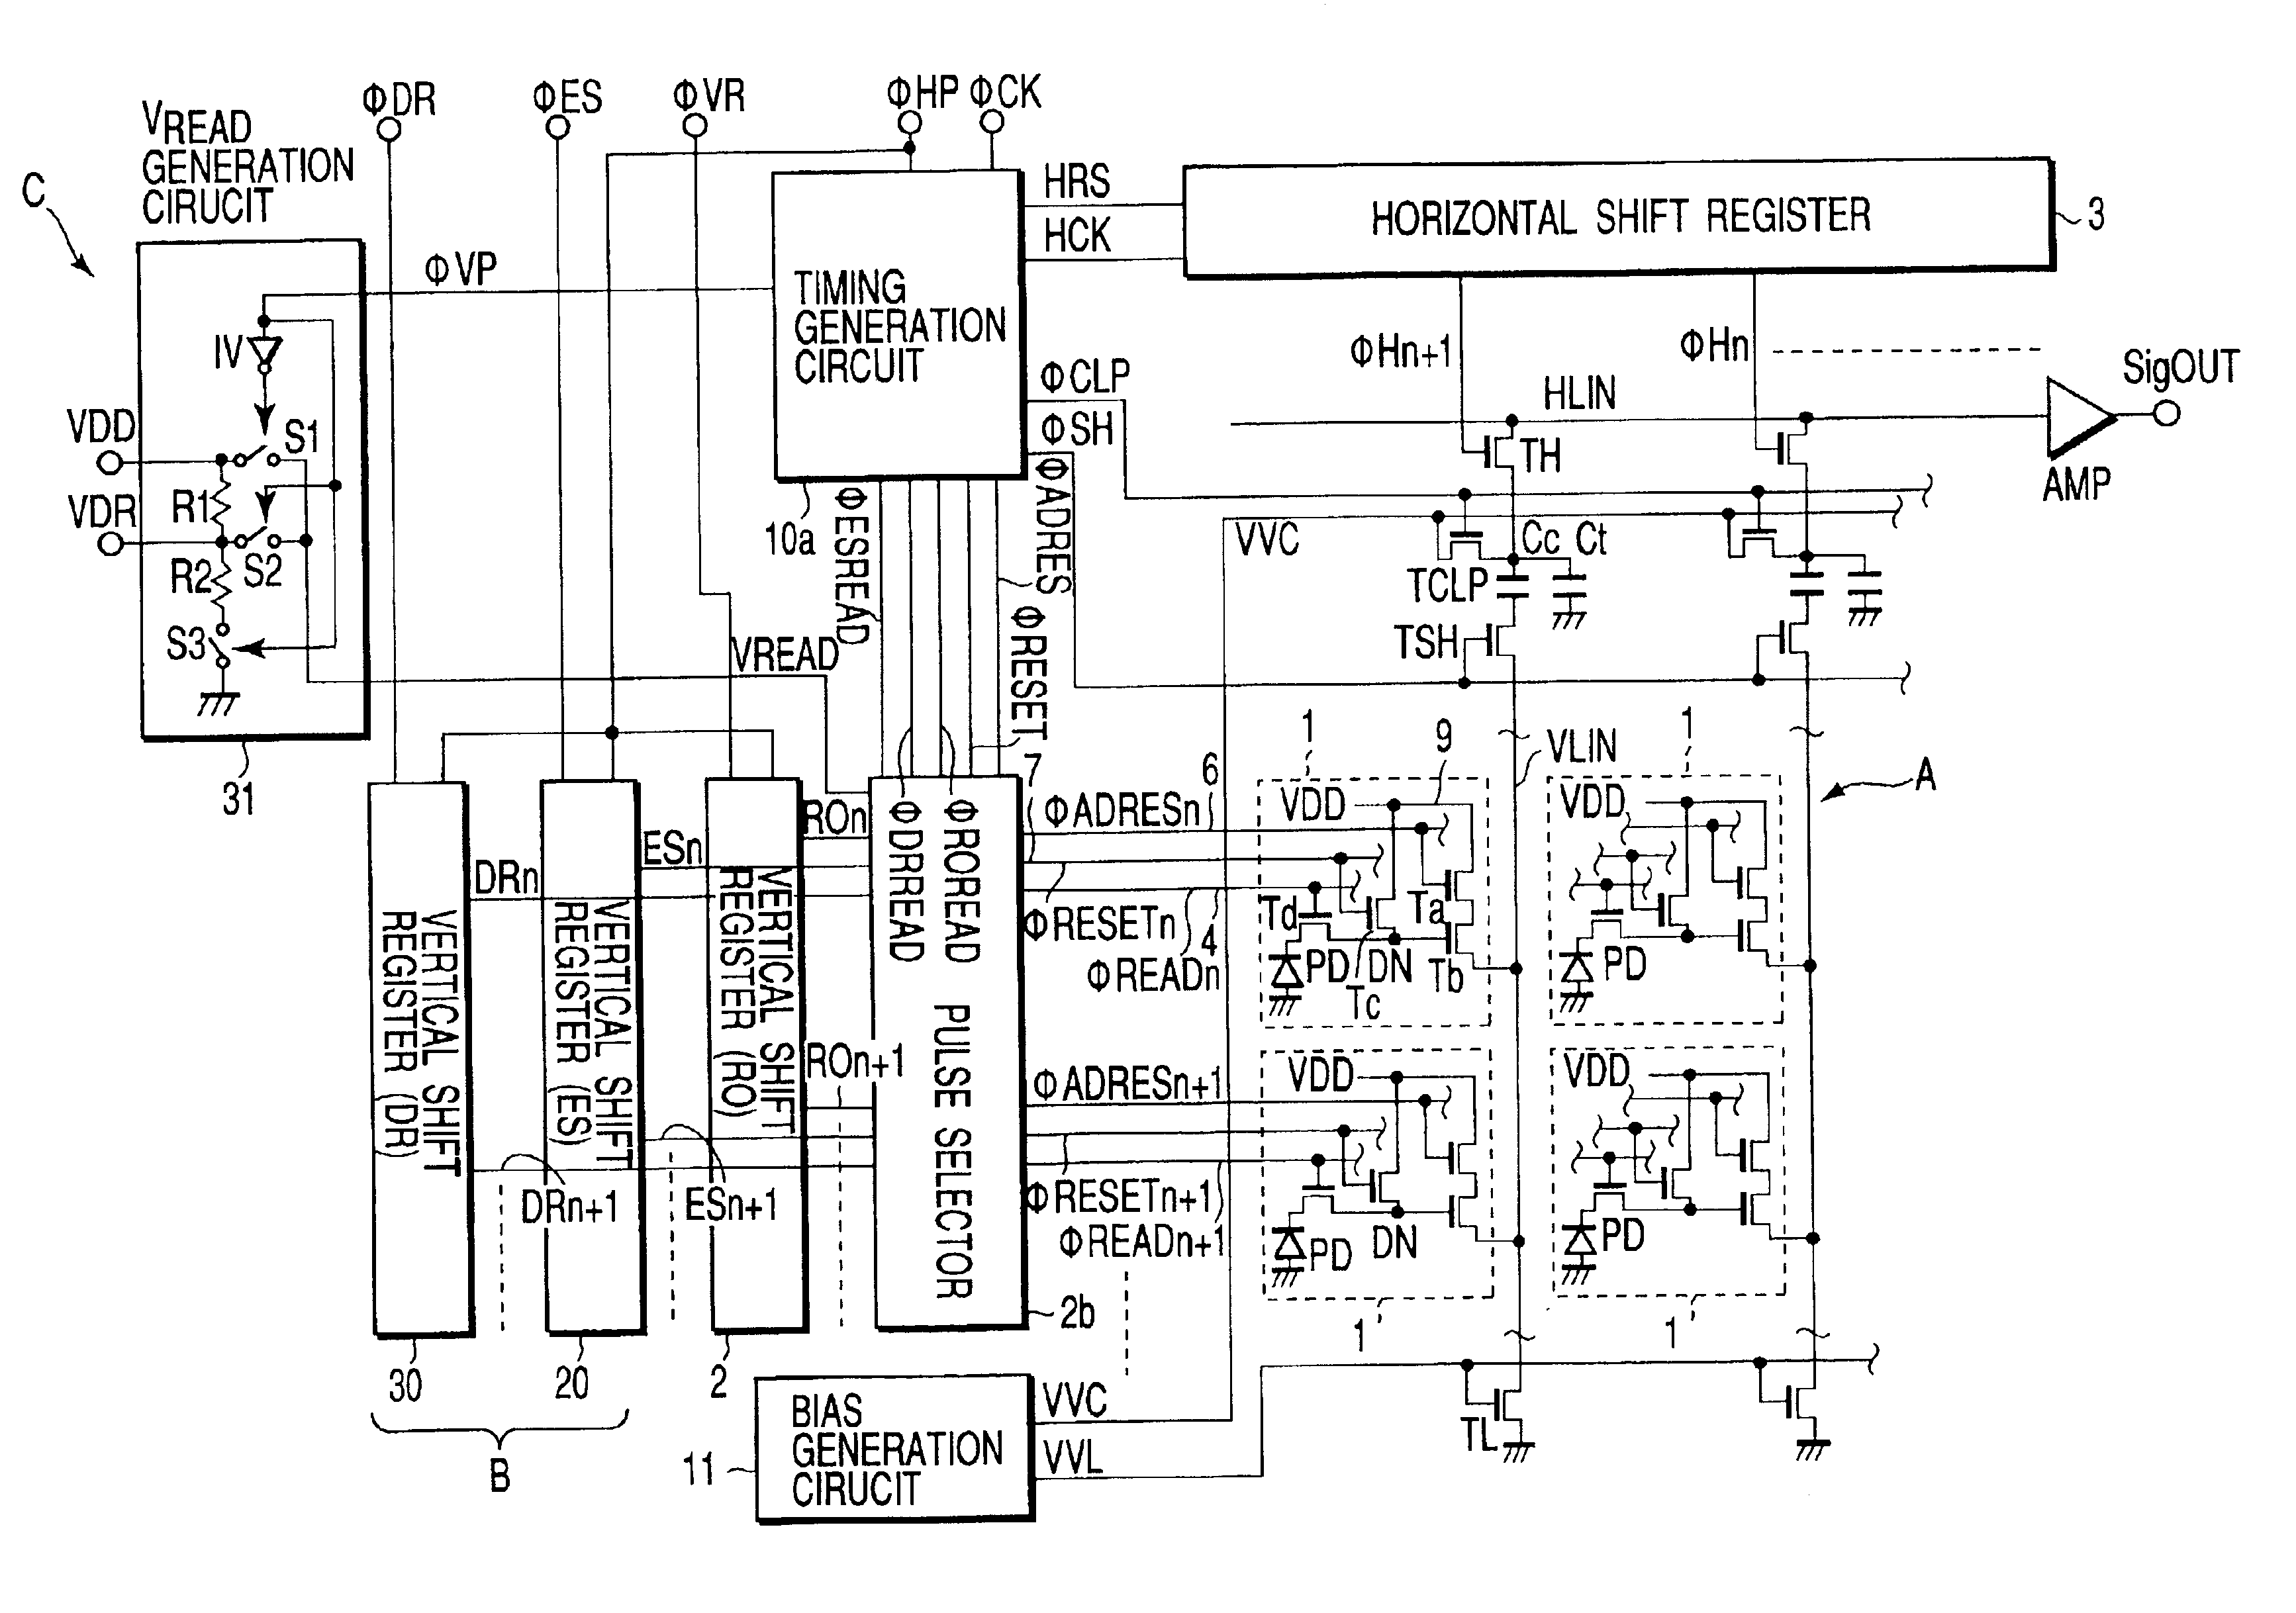 Solid-state imaging device with dynamic range control